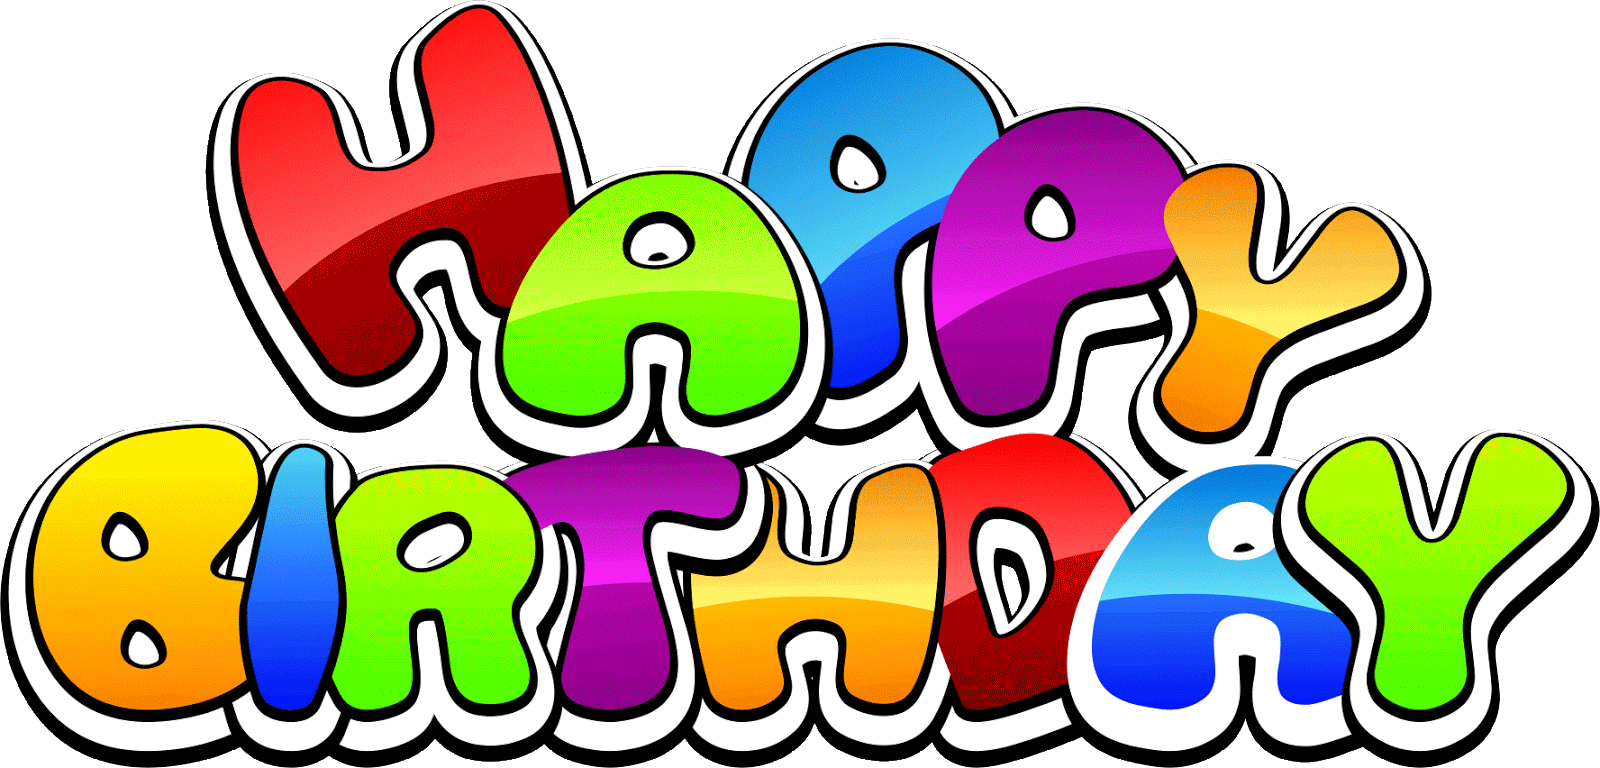  cake no candles. Singer clipart happy birthday